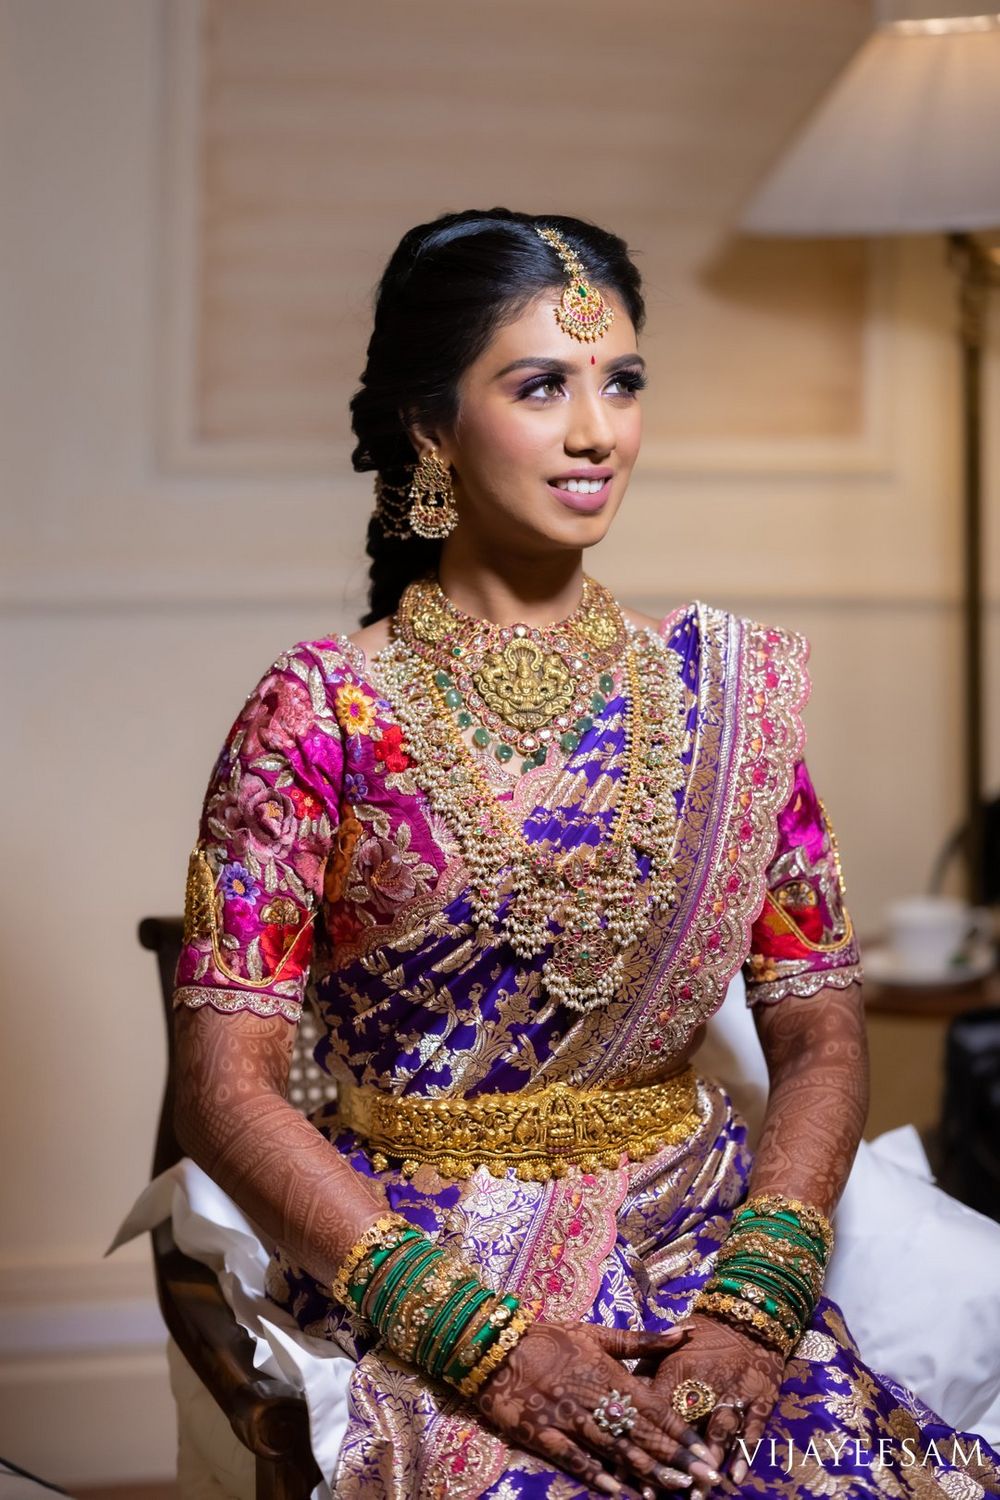 Photo of South Indian bride wearing an aubergine and gold saree with a multi-coloured blouse.